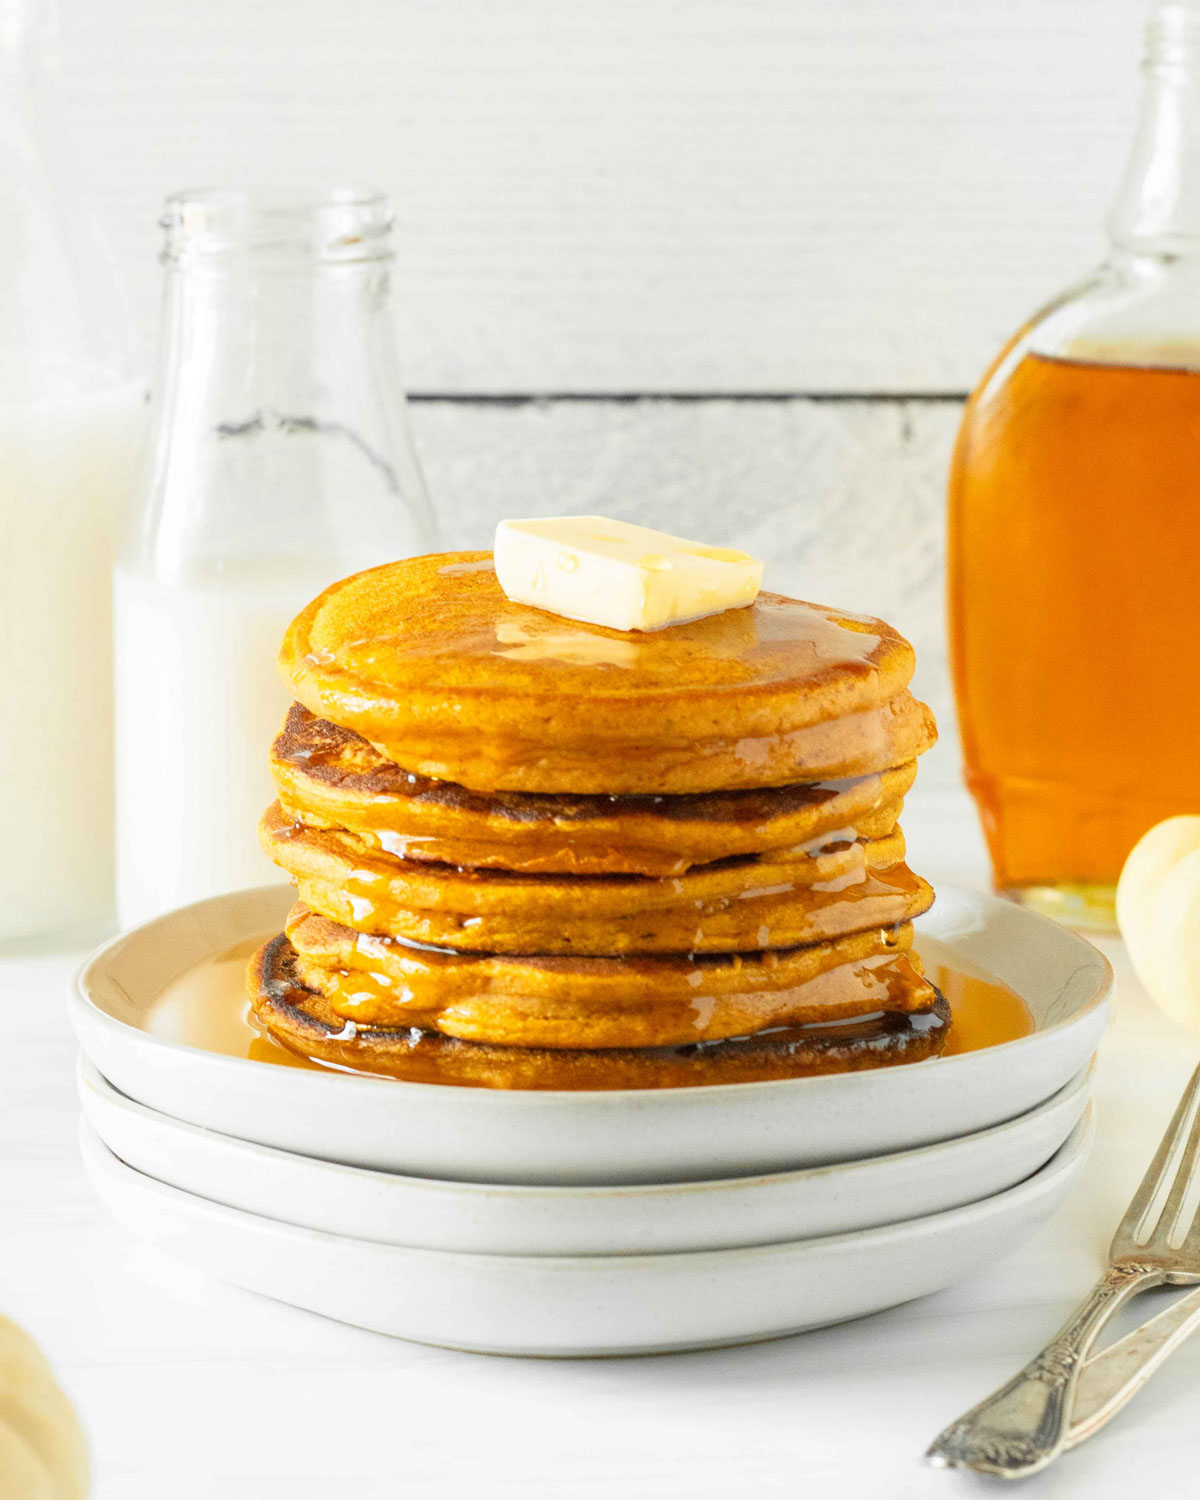 These sourdough pumpkin pancakes are an easy sourdough recipe made with simple ingredients including pumpkin puree, classic fall spices and sourdough discard to make delicious pumpkin pancakes.